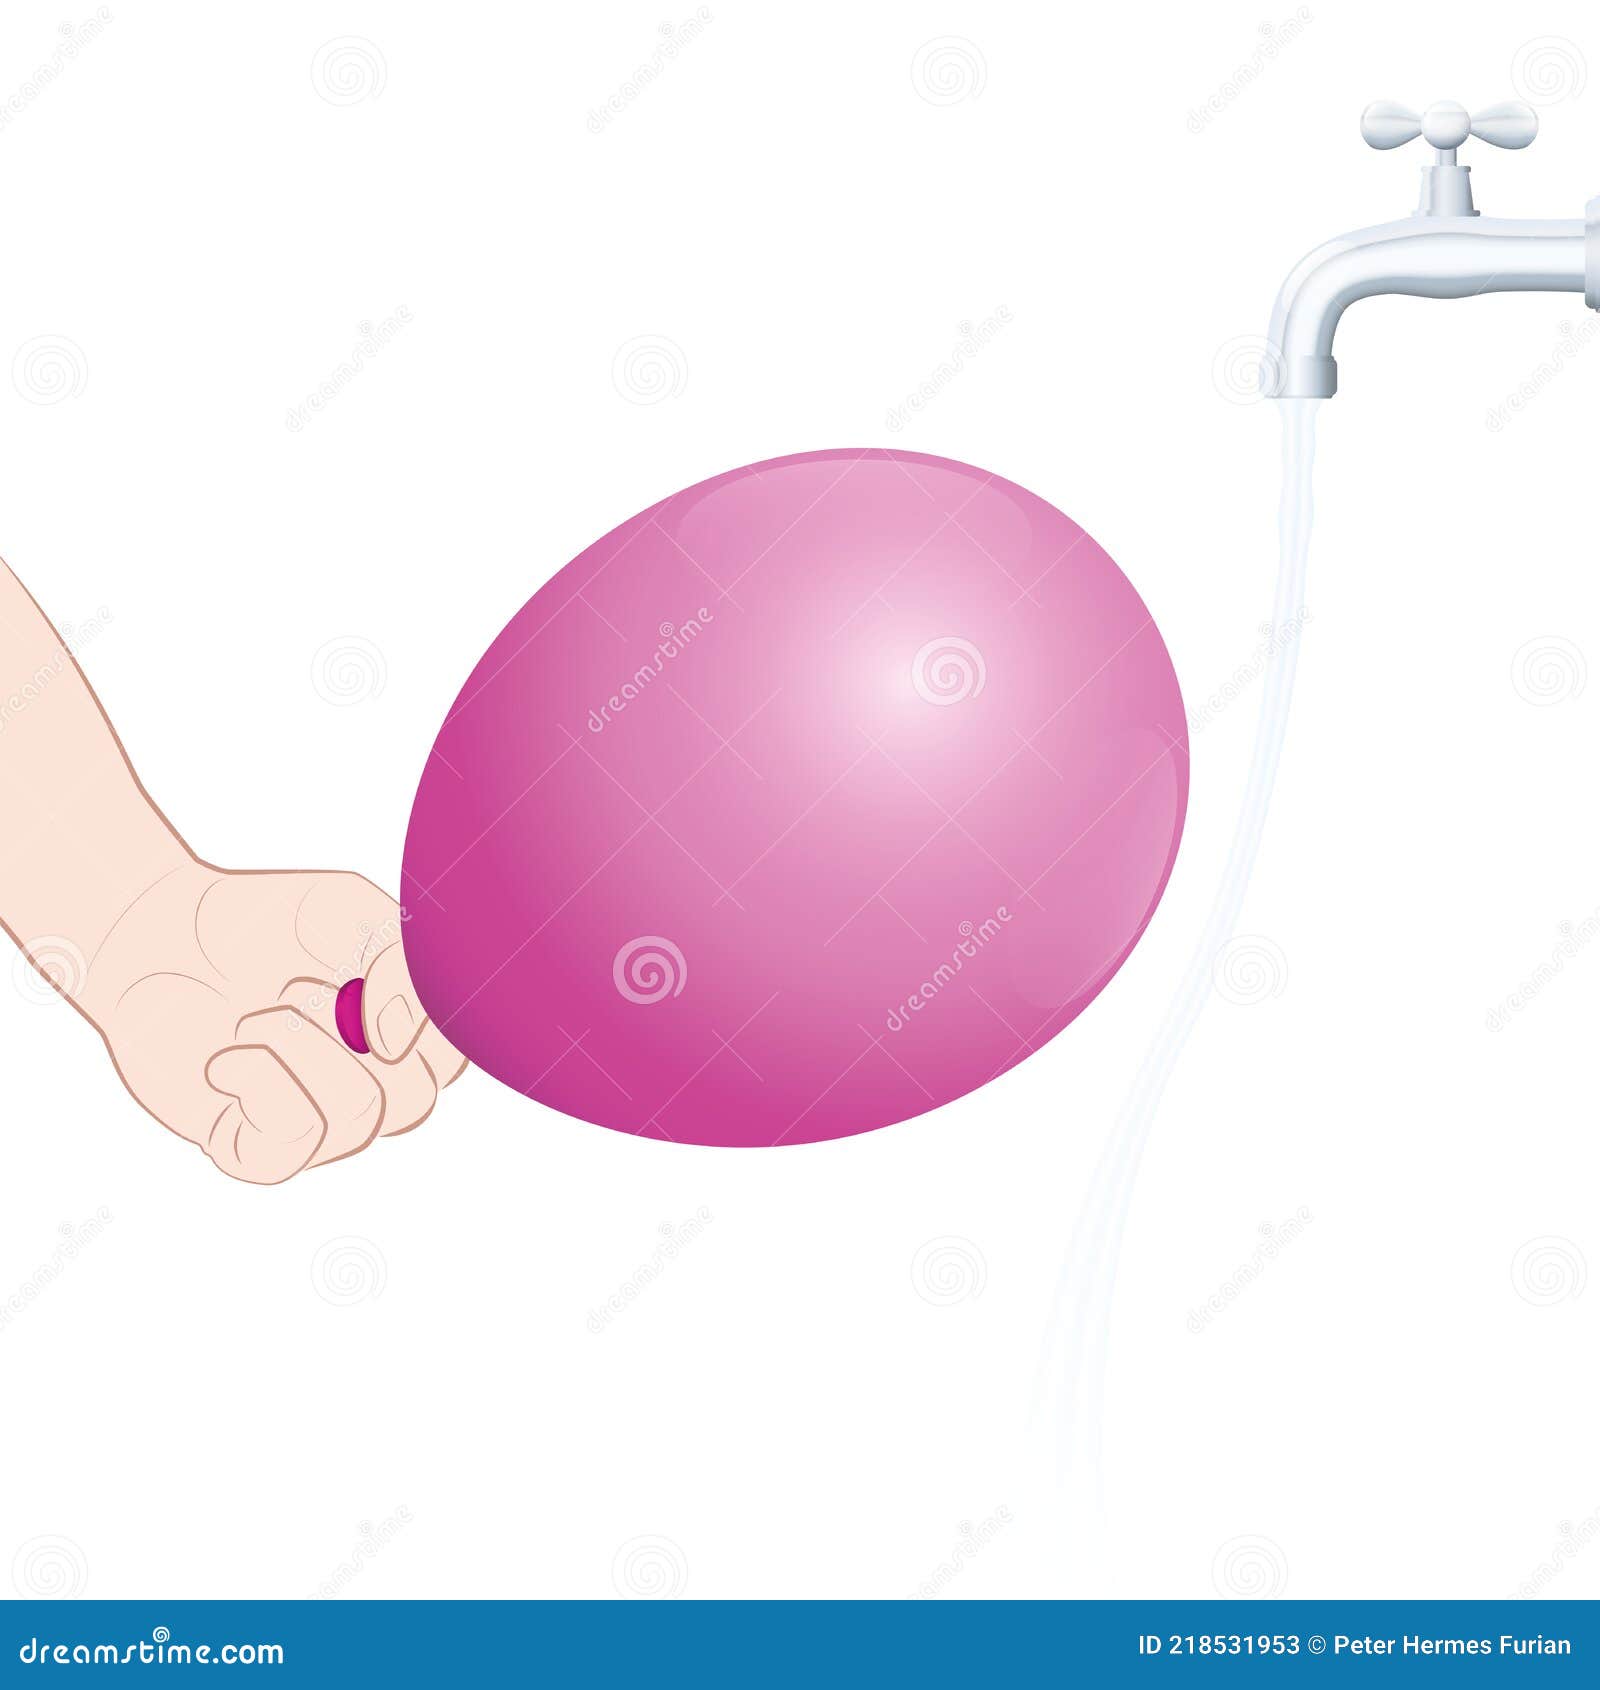 Collection 103+ Images why is water attracted to a charged balloon Stunning